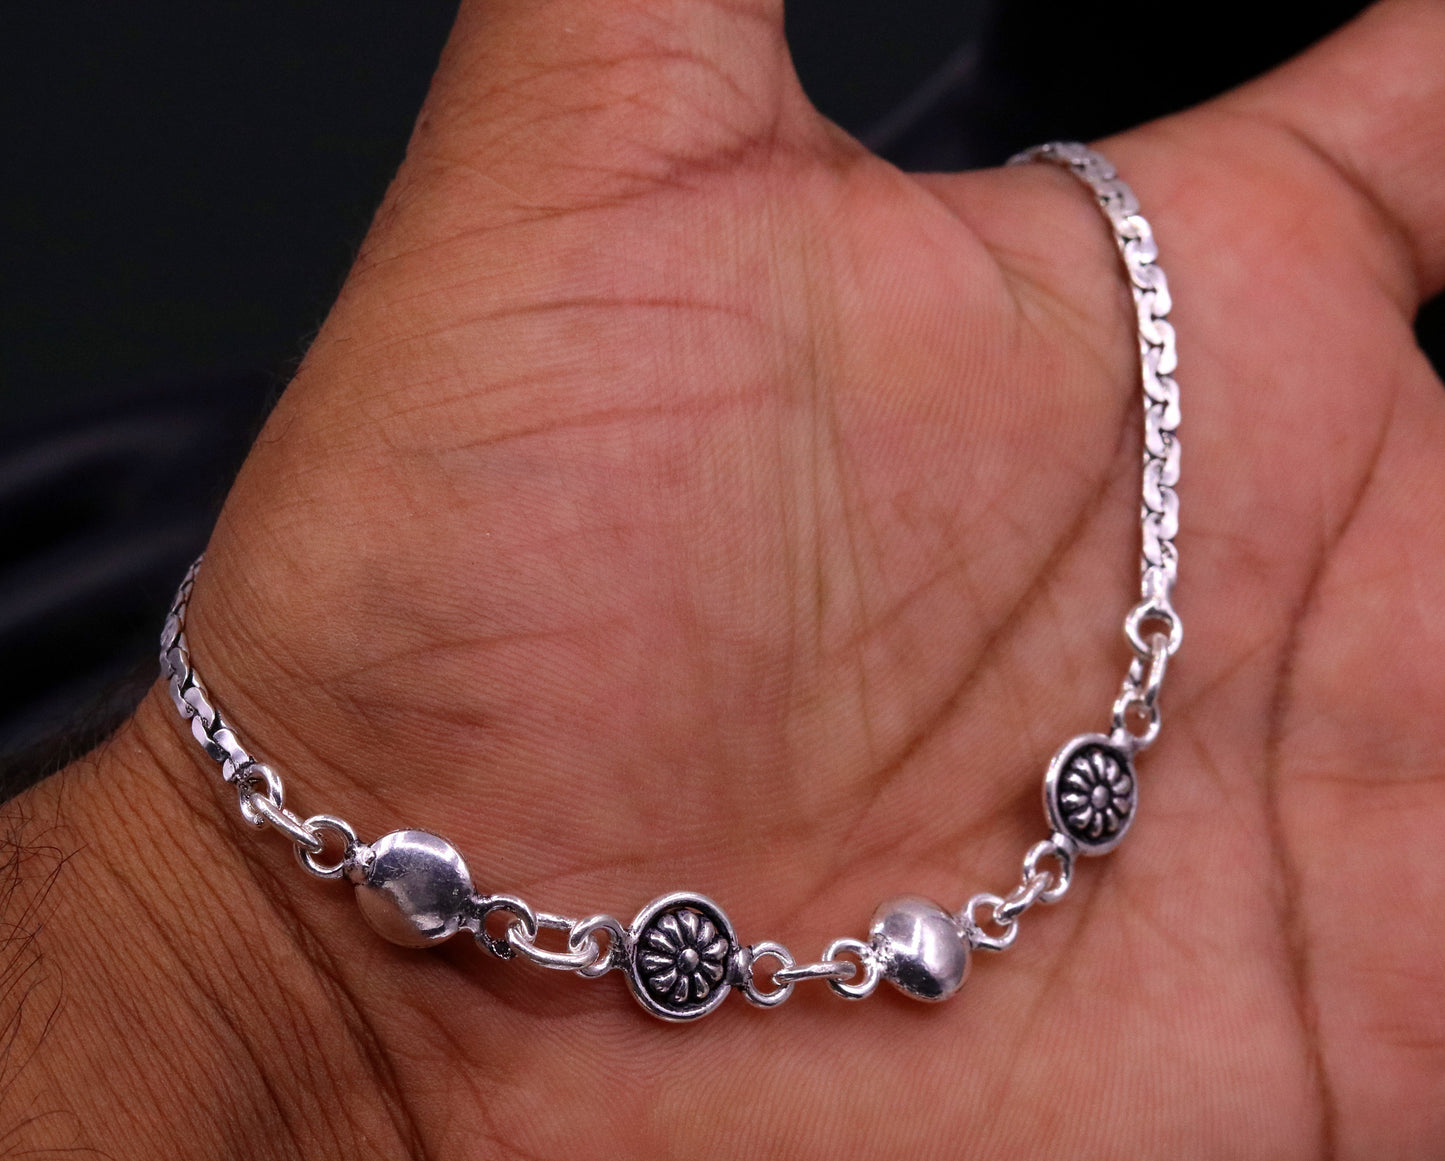 925 sterling silver handmade best gift for girl's bridesmaid gifting, excellent charm bracelet anklets, feet bracelet ankle jewelry ank93 - TRIBAL ORNAMENTS